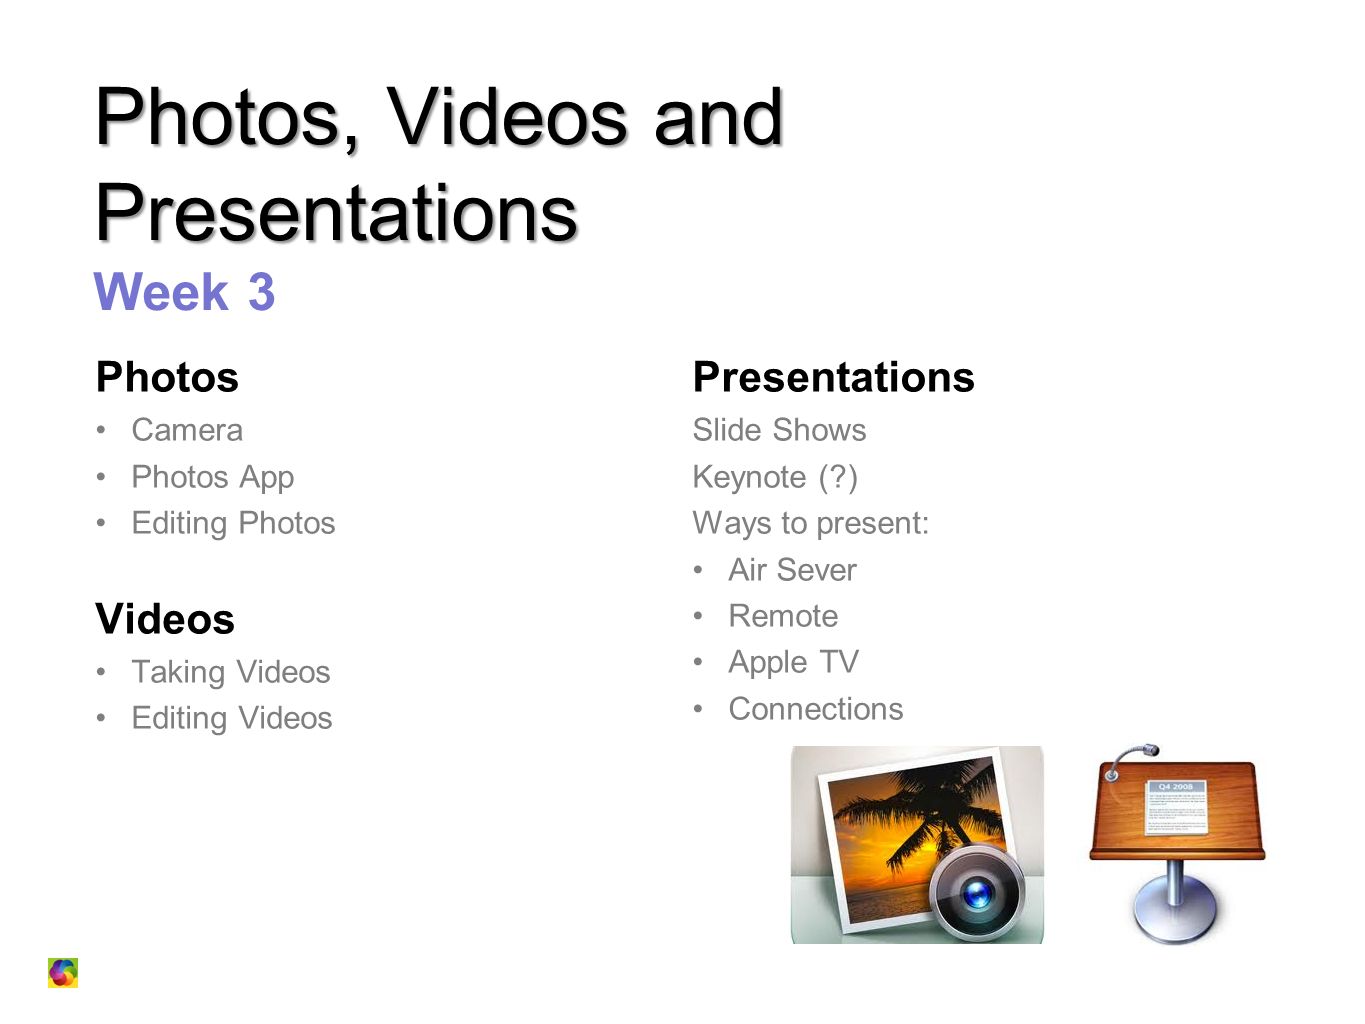 Photos, Videos and Presentations Photos, Videos and Presentations Week 3 Photos Camera Photos App Editing Photos Videos Taking Videos Editing Videos Presentations Slide Shows Keynote ( ) Ways to present: Air Sever Remote Apple TV Connections